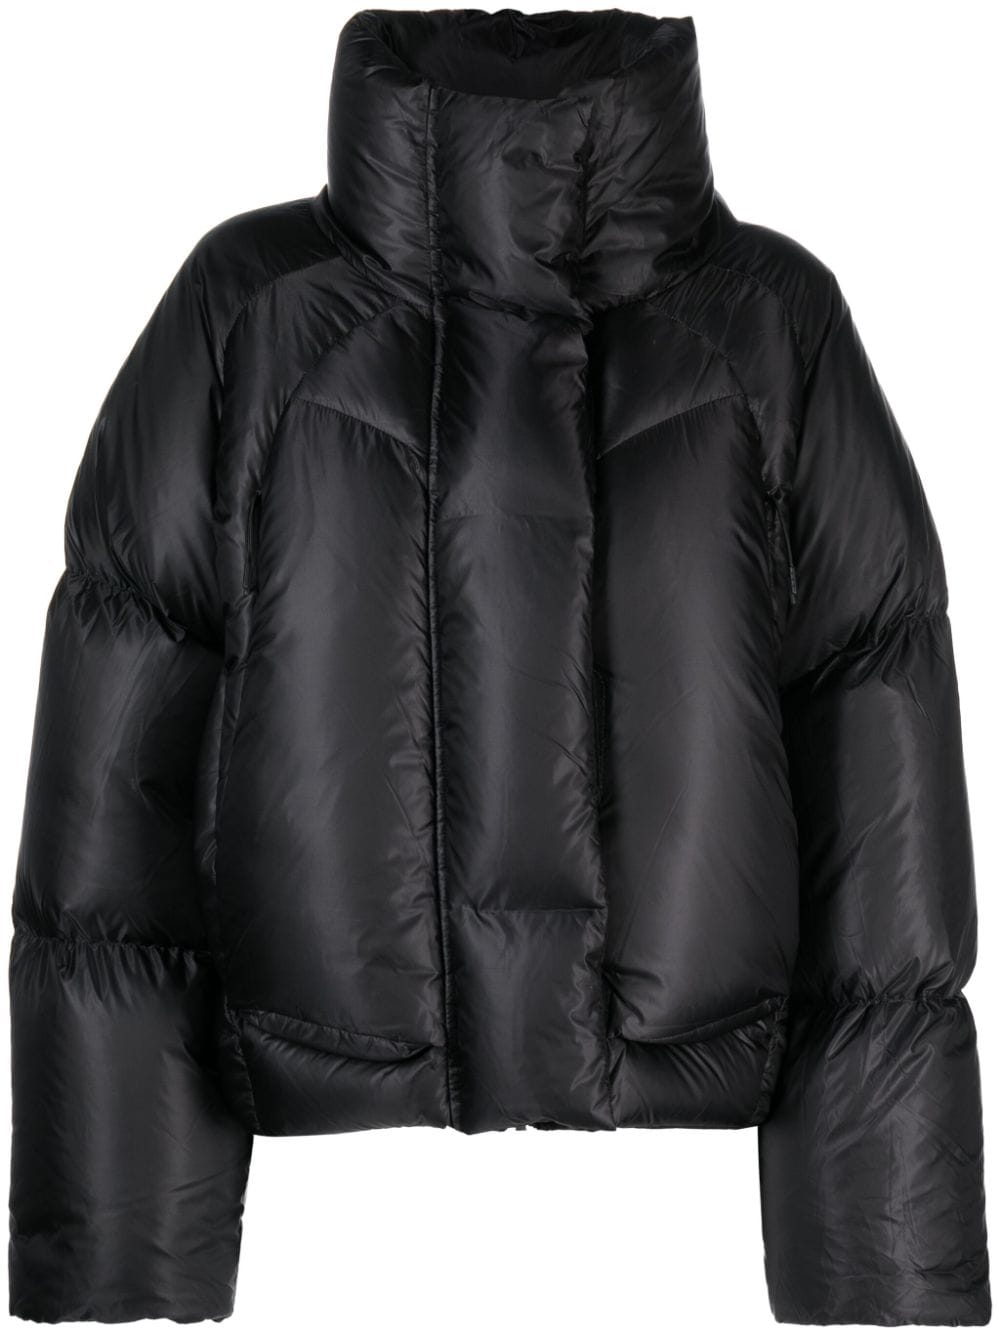 Image 1 of ENTIRE STUDIOS UVR puffer jacket